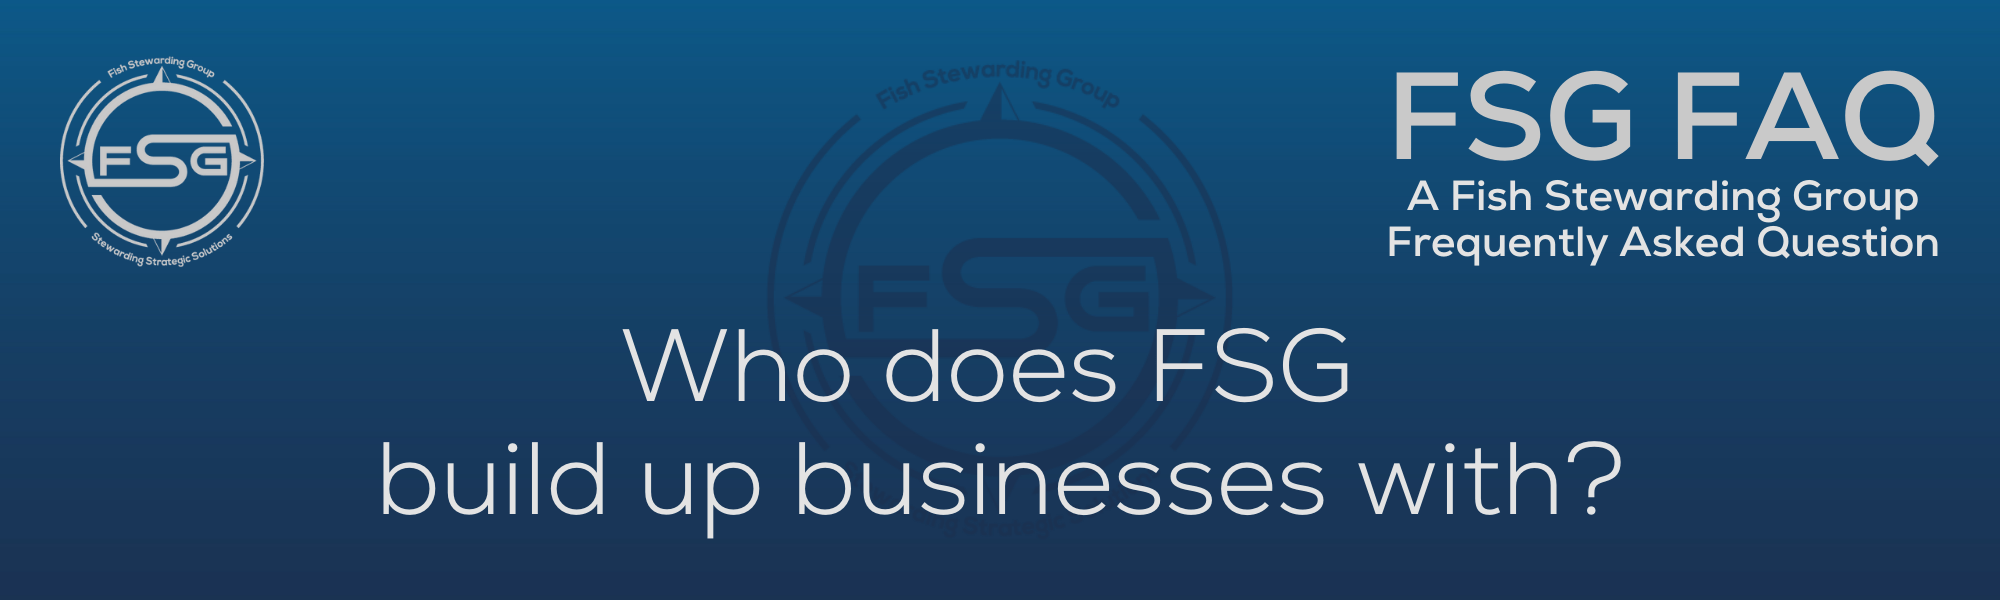 A rectangular and long thing Footer FAQ Image on the bottom of the Who does FSG build up businesses with? Page on the website. The background is a blue gradient color that goes from a dark blue on the bottom to a lighter blue on top. The text in lower center of the image in a light gray text that reads: Who does FSG build up businesses withThe text in gray in the upper right corner reads: FSG FAQ. Right beneath that is more gray text in a smaller font that reads: A Fish Stewarding Group Frequently Asked Question. On the upper left side is the FSG Logo in gray. The logo has the letters FSG in the middle with a circle with four pointed arrows facing north, south, east and west with the S connected to that circle. Four rounded lines make the next circle of the circle and the last layer is a thin circle with the text on the Bottom that reads Stewarding Strategist Solutions and on top, the text reads Fish Stewarding Group. And Lastly in the center background of the image is a watermarked FSG logo, faded in blue, in the background.